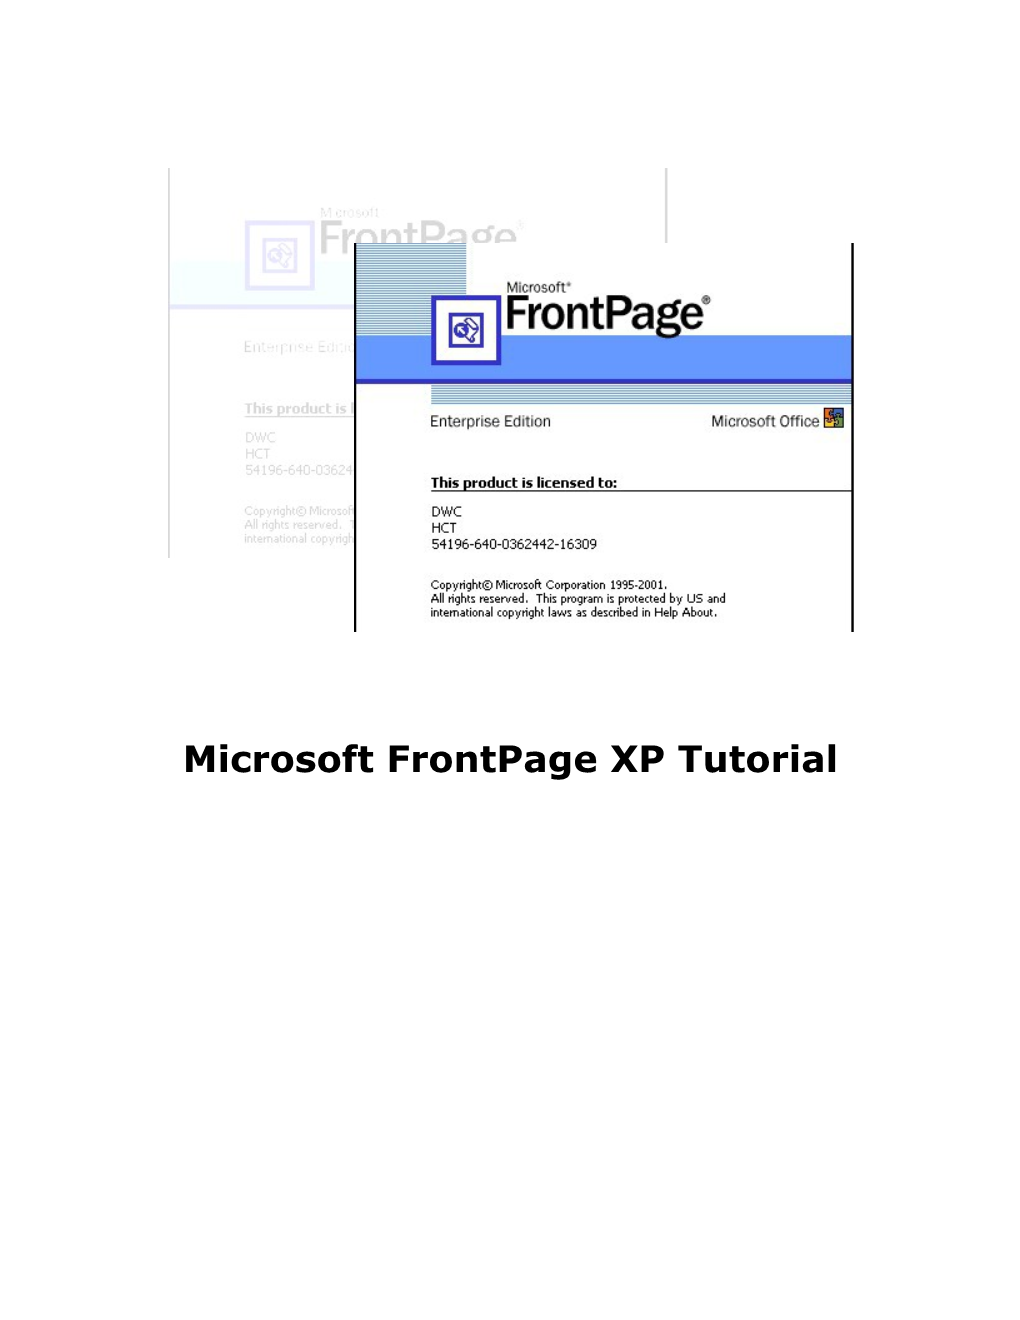 MS Frontpage XP Tutorial Manual